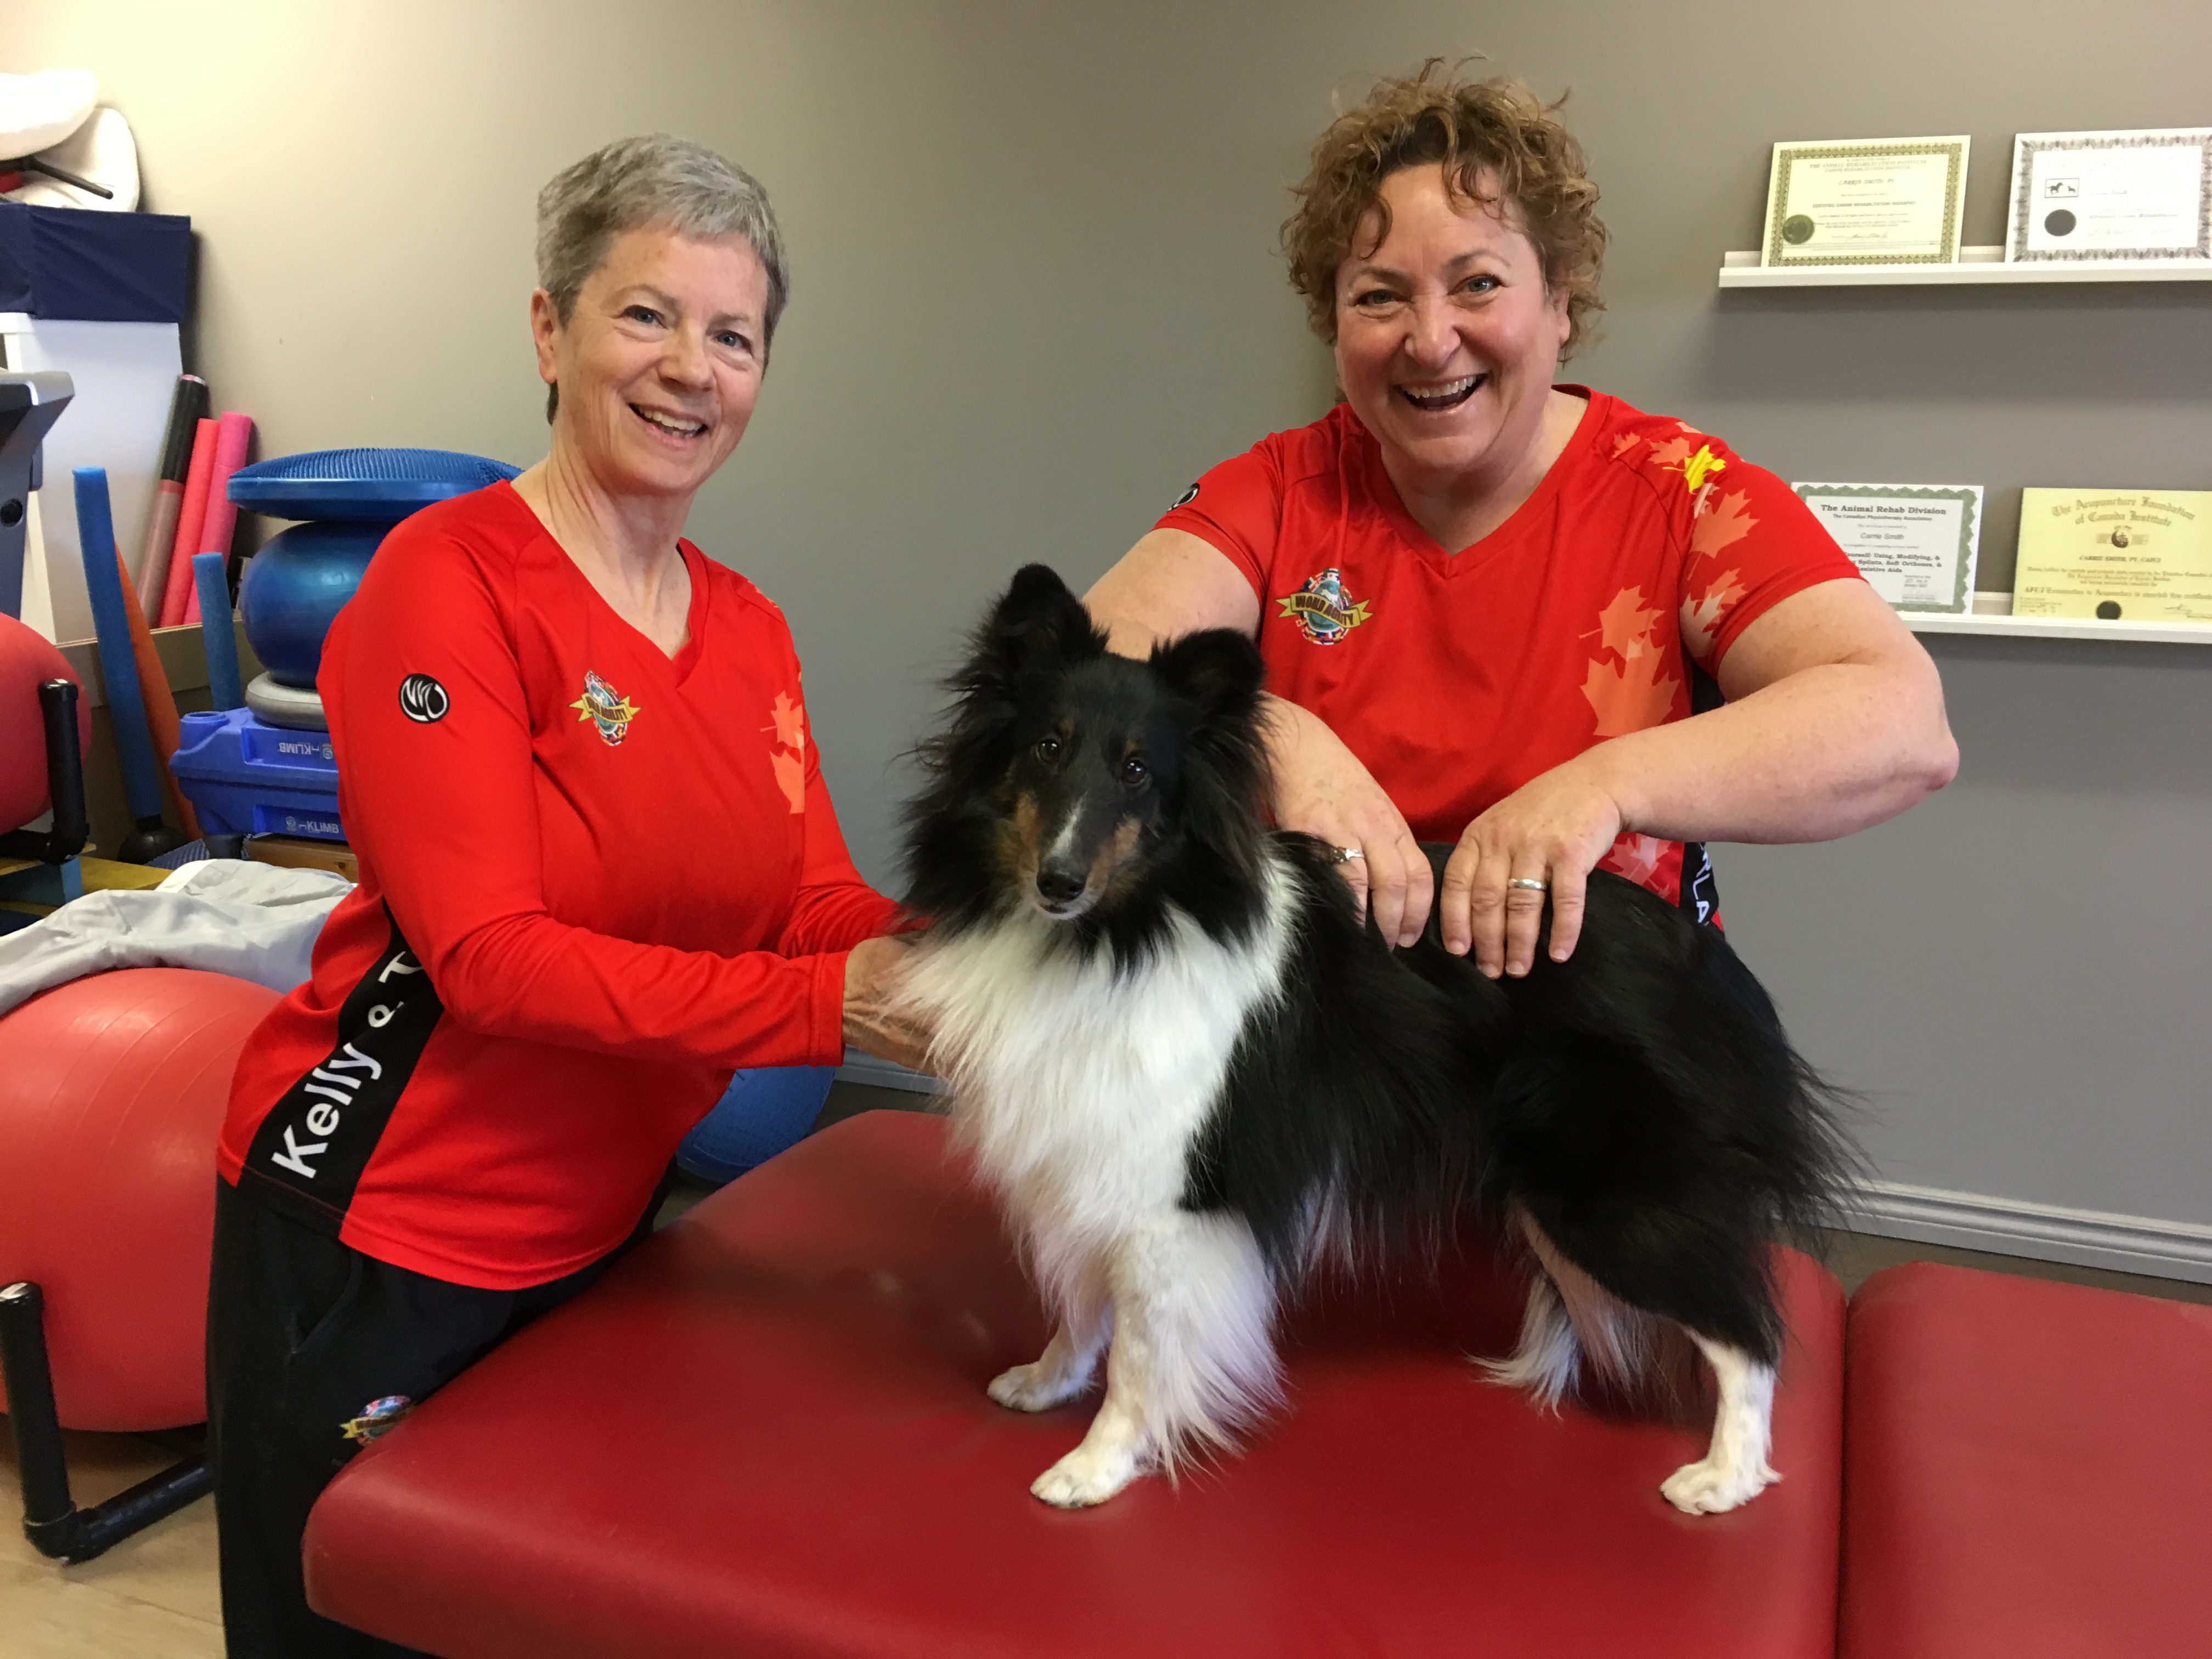 Kemptville Physiotherapy Centre